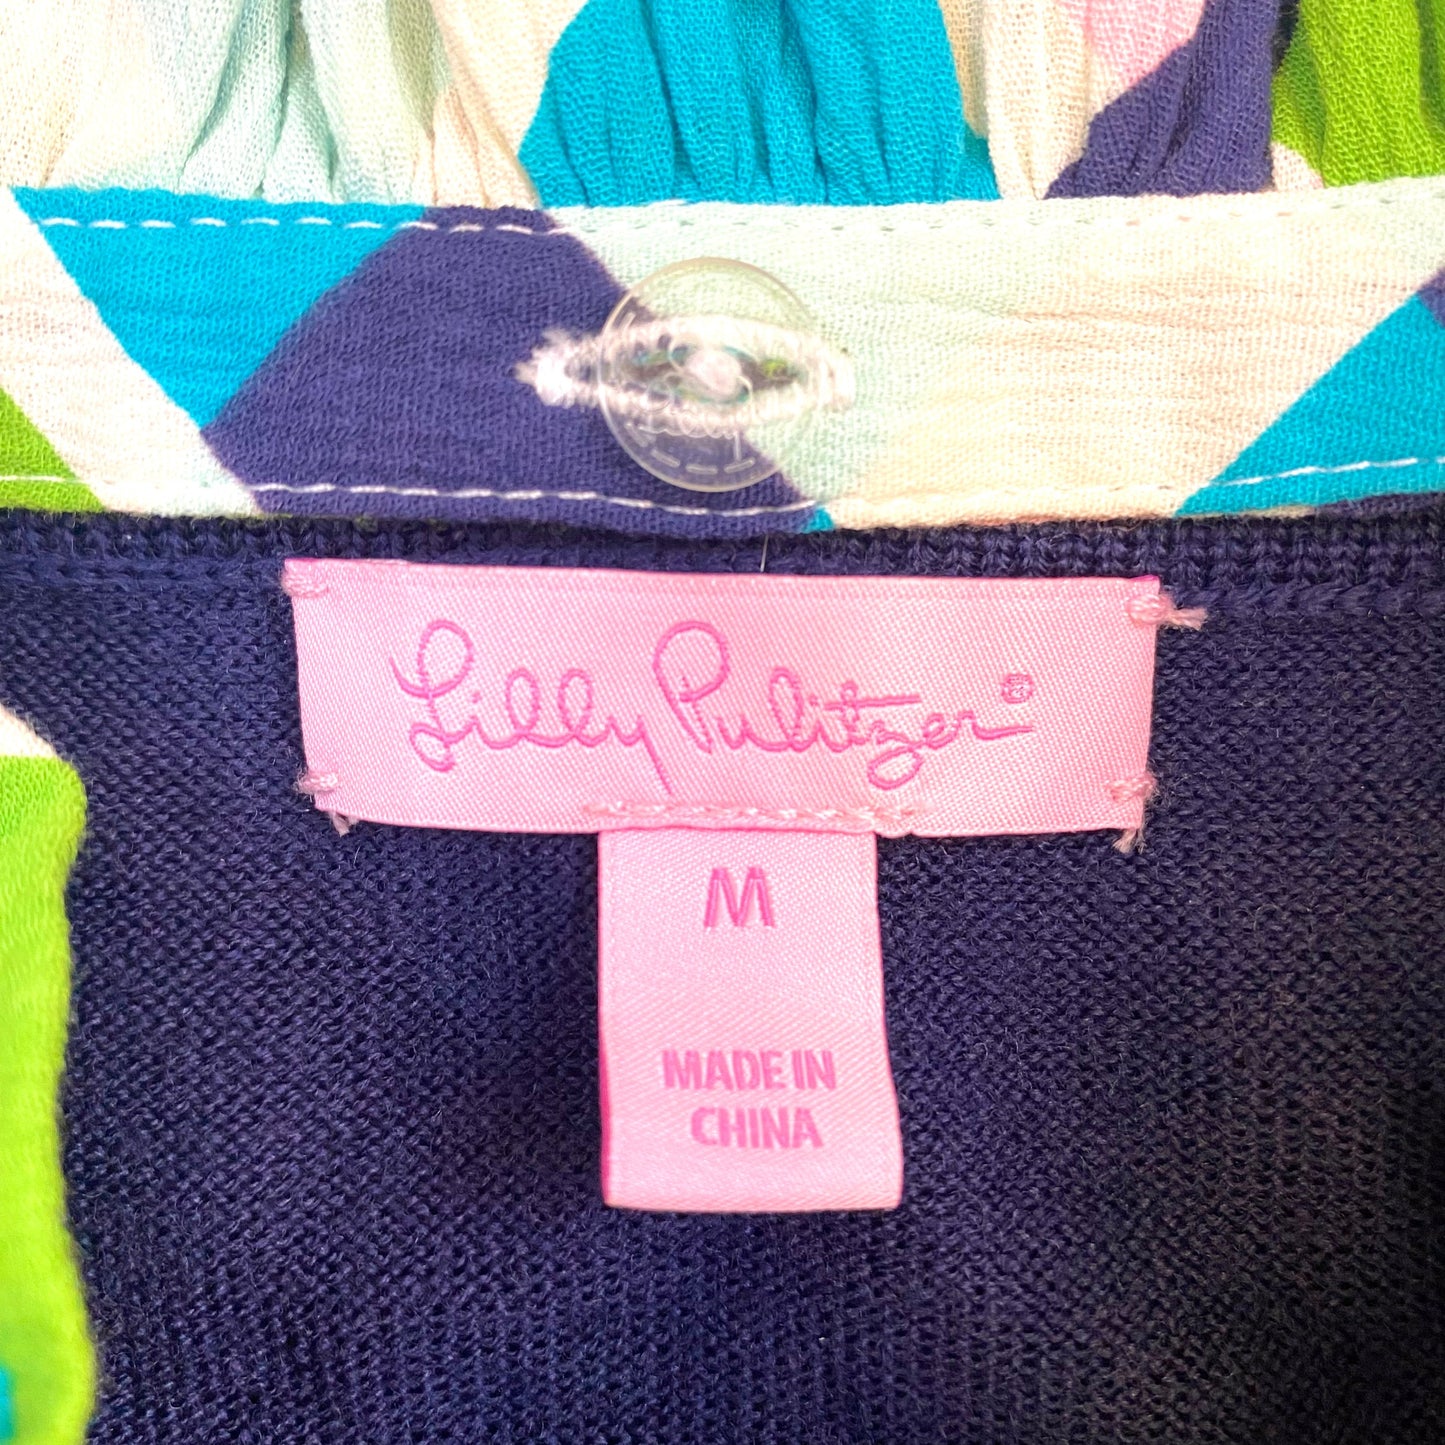 Sweater Designer By Lilly Pulitzer  Size: M